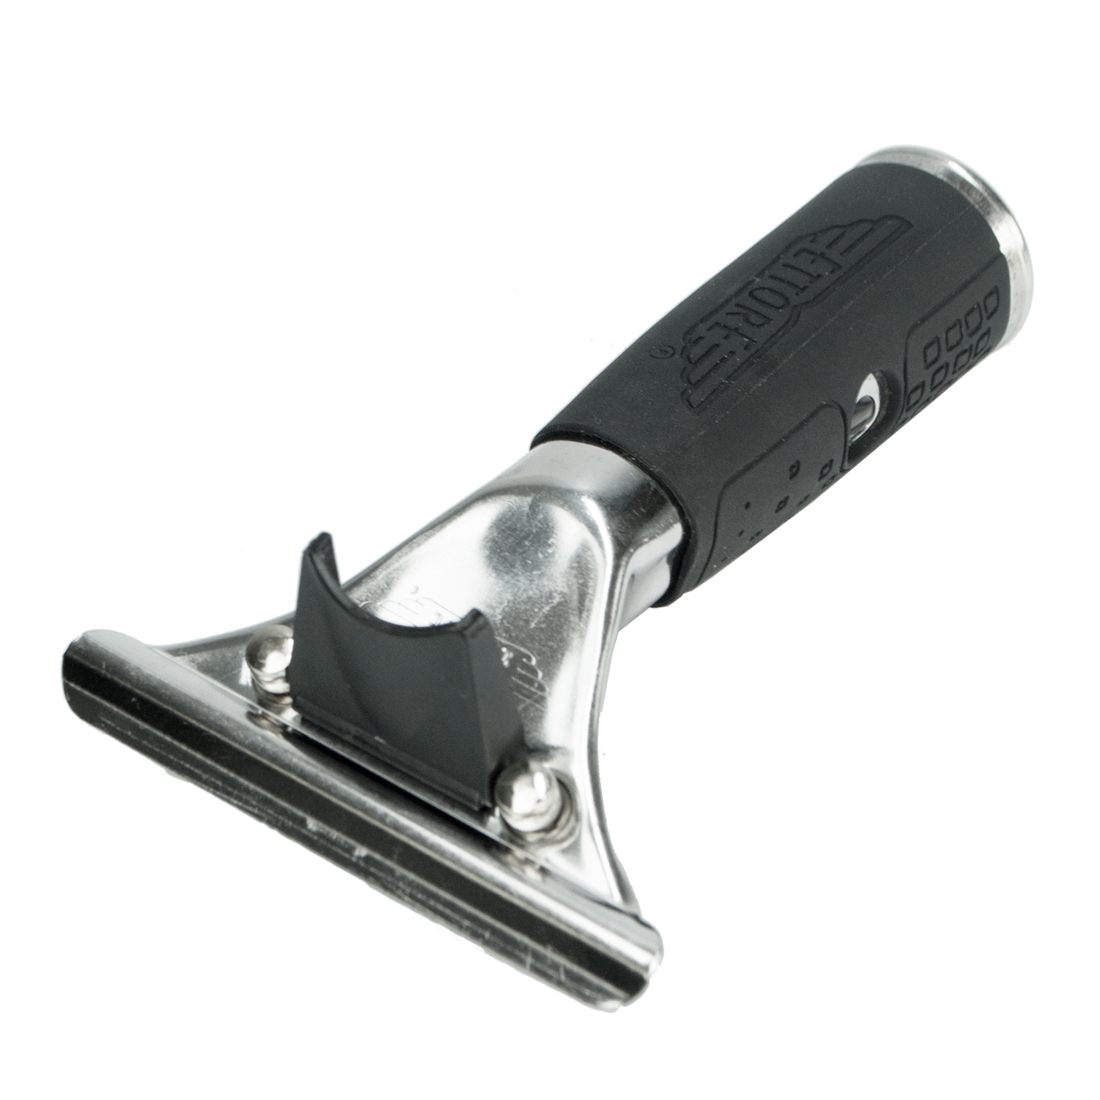 Ettore Quick Release Stainless Steel with Rubber Grip Squeegee Handle